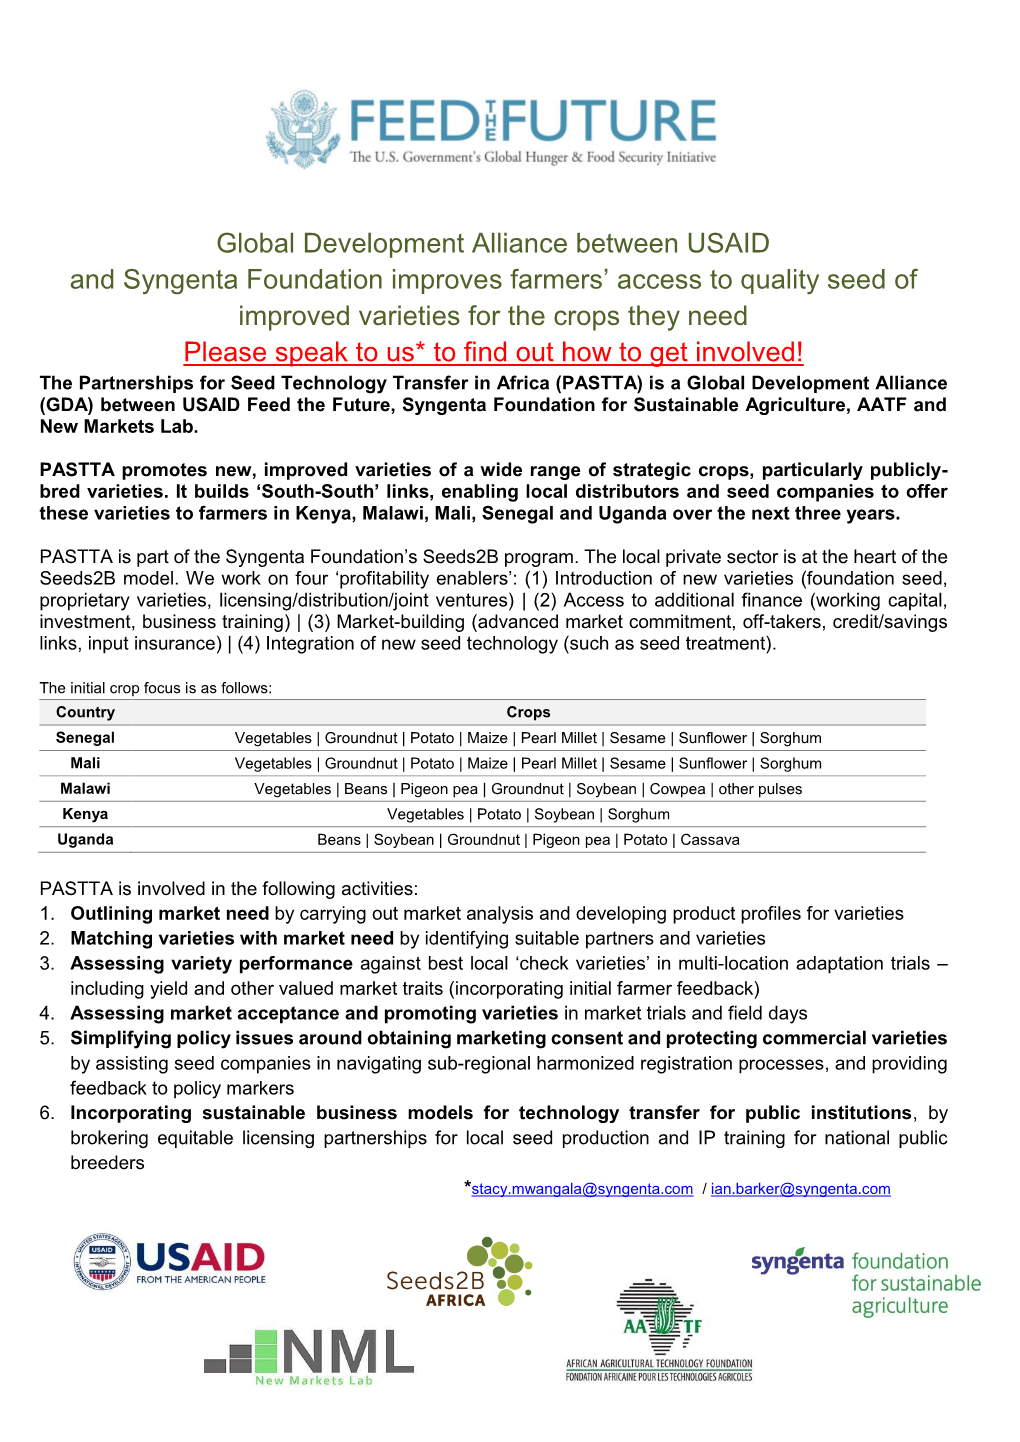 Global Development Alliance Between USAID and Syngenta Foundation